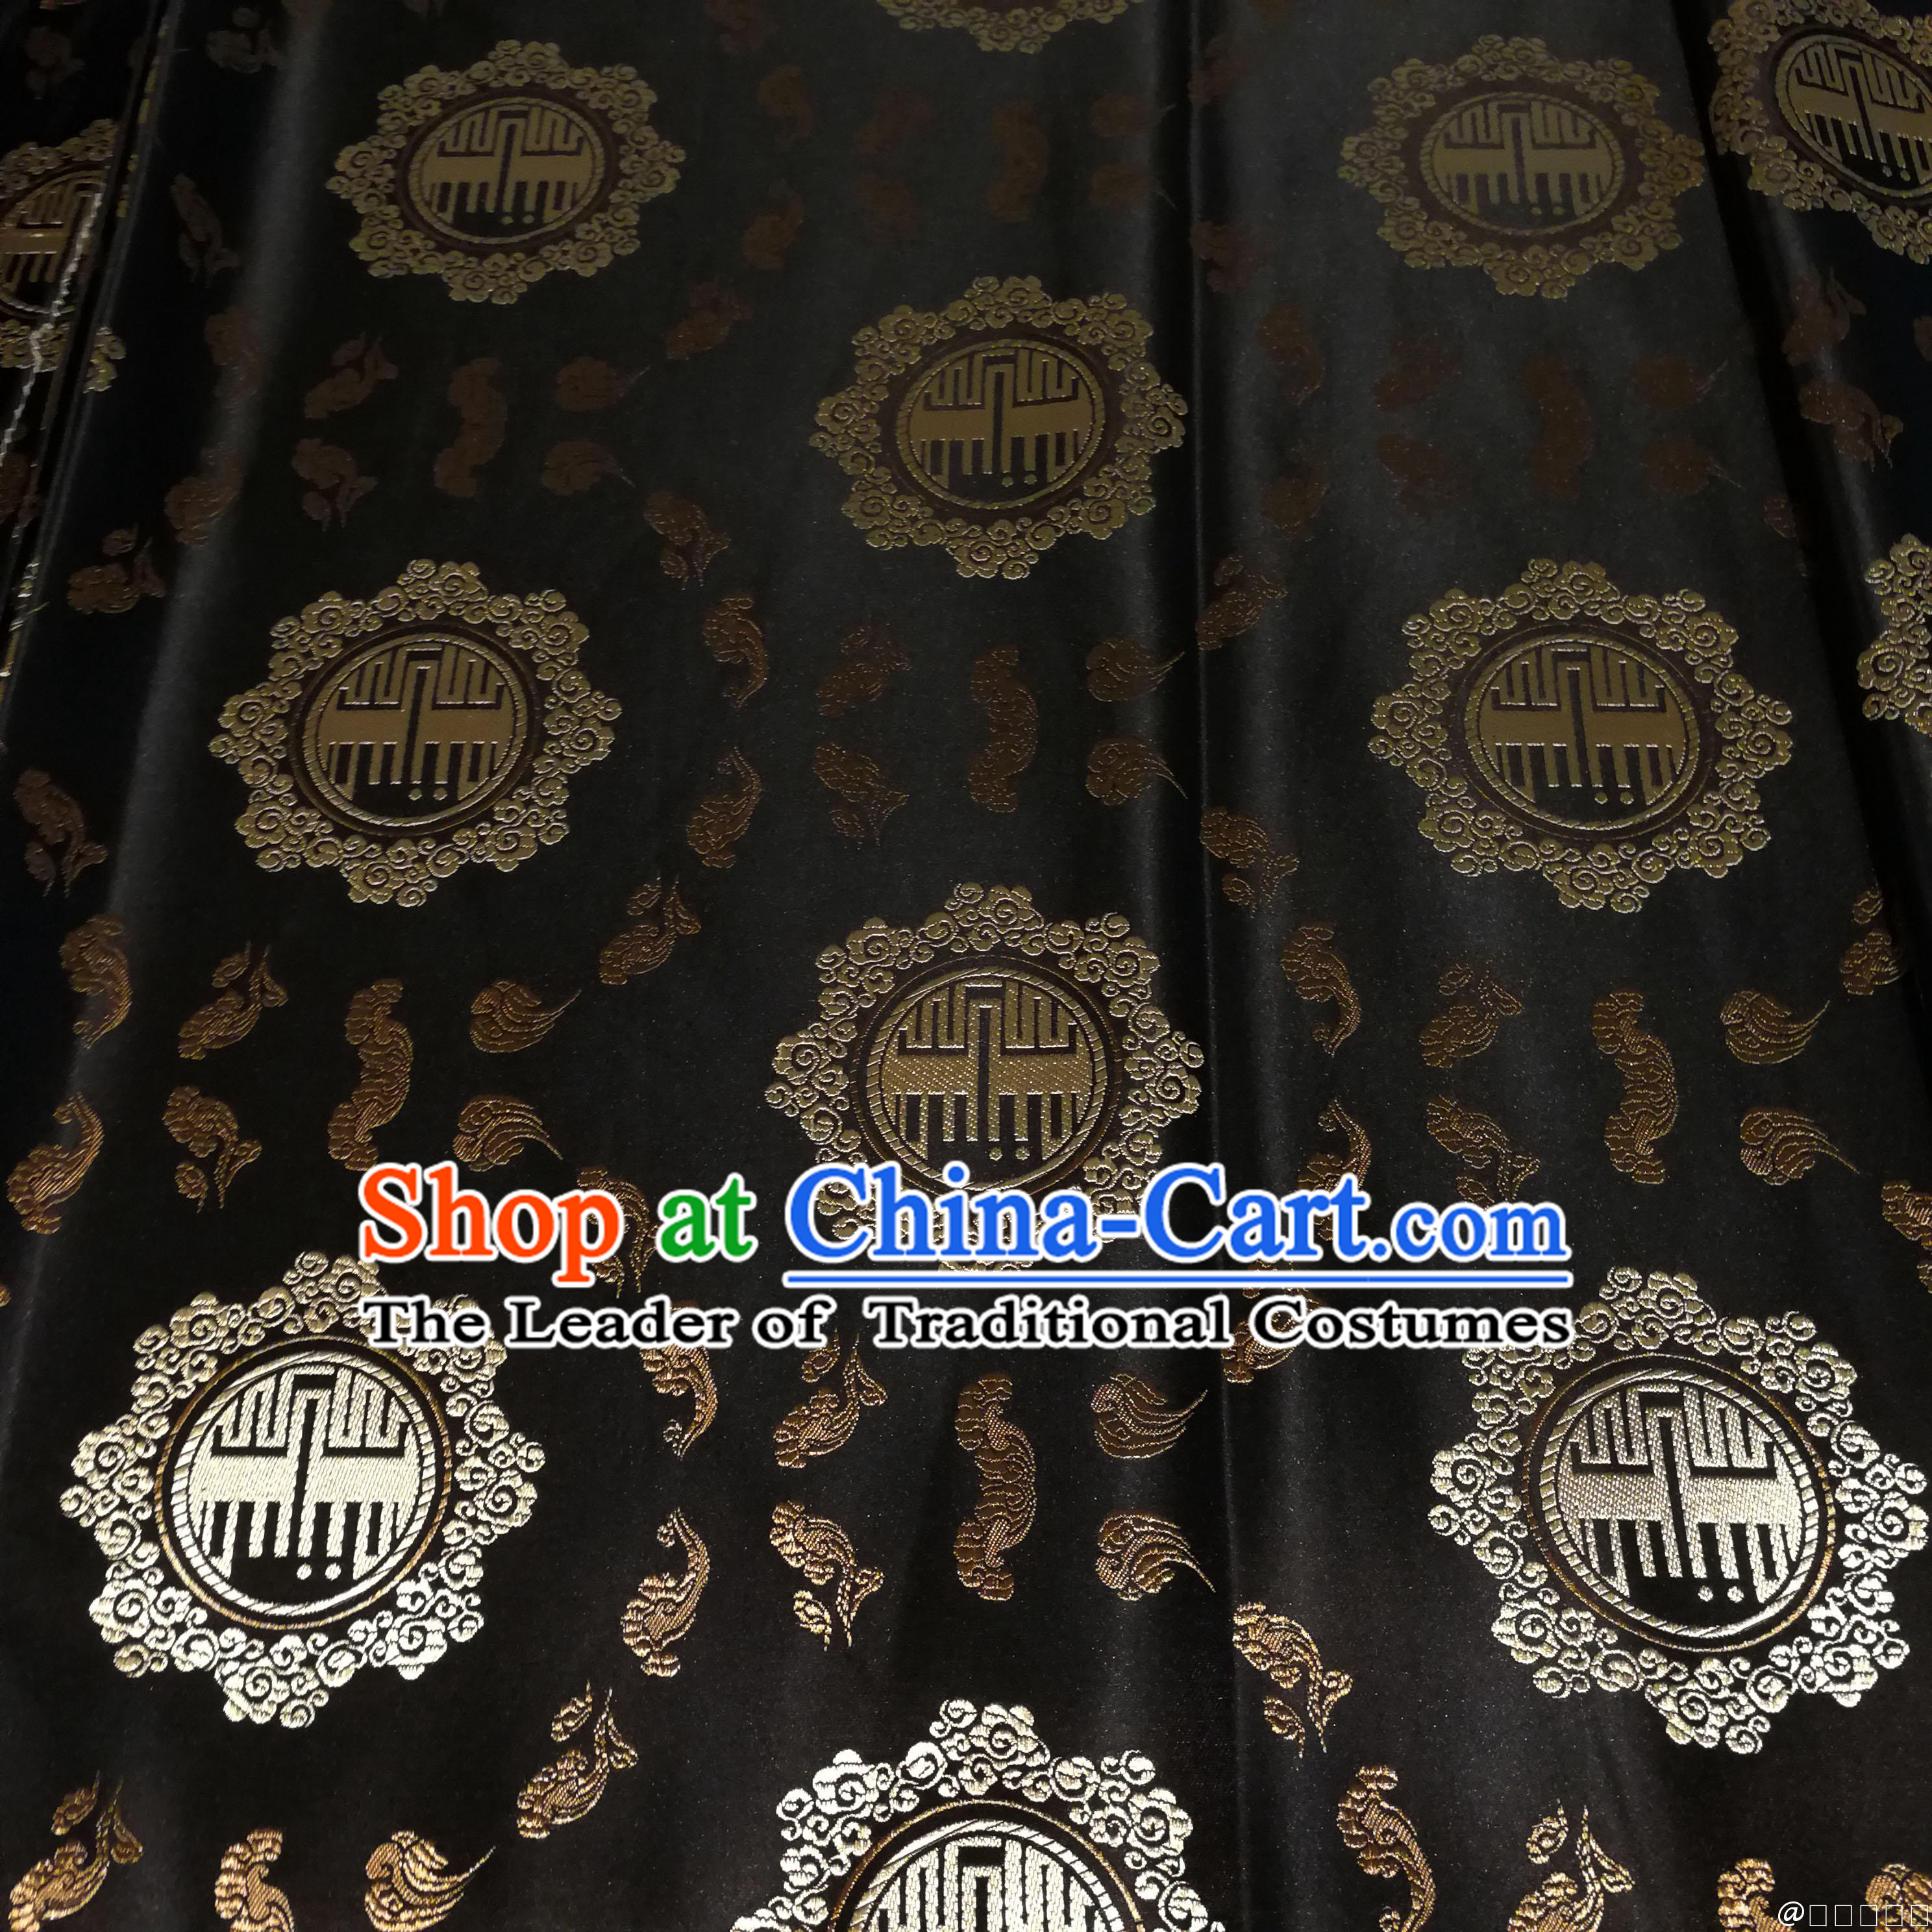 Black Color Chinese Royal Palace Style Traditional Pattern Auspicious Cloud Design Brocade Fabric Silk Fabric Chinese Fabric Asian Material